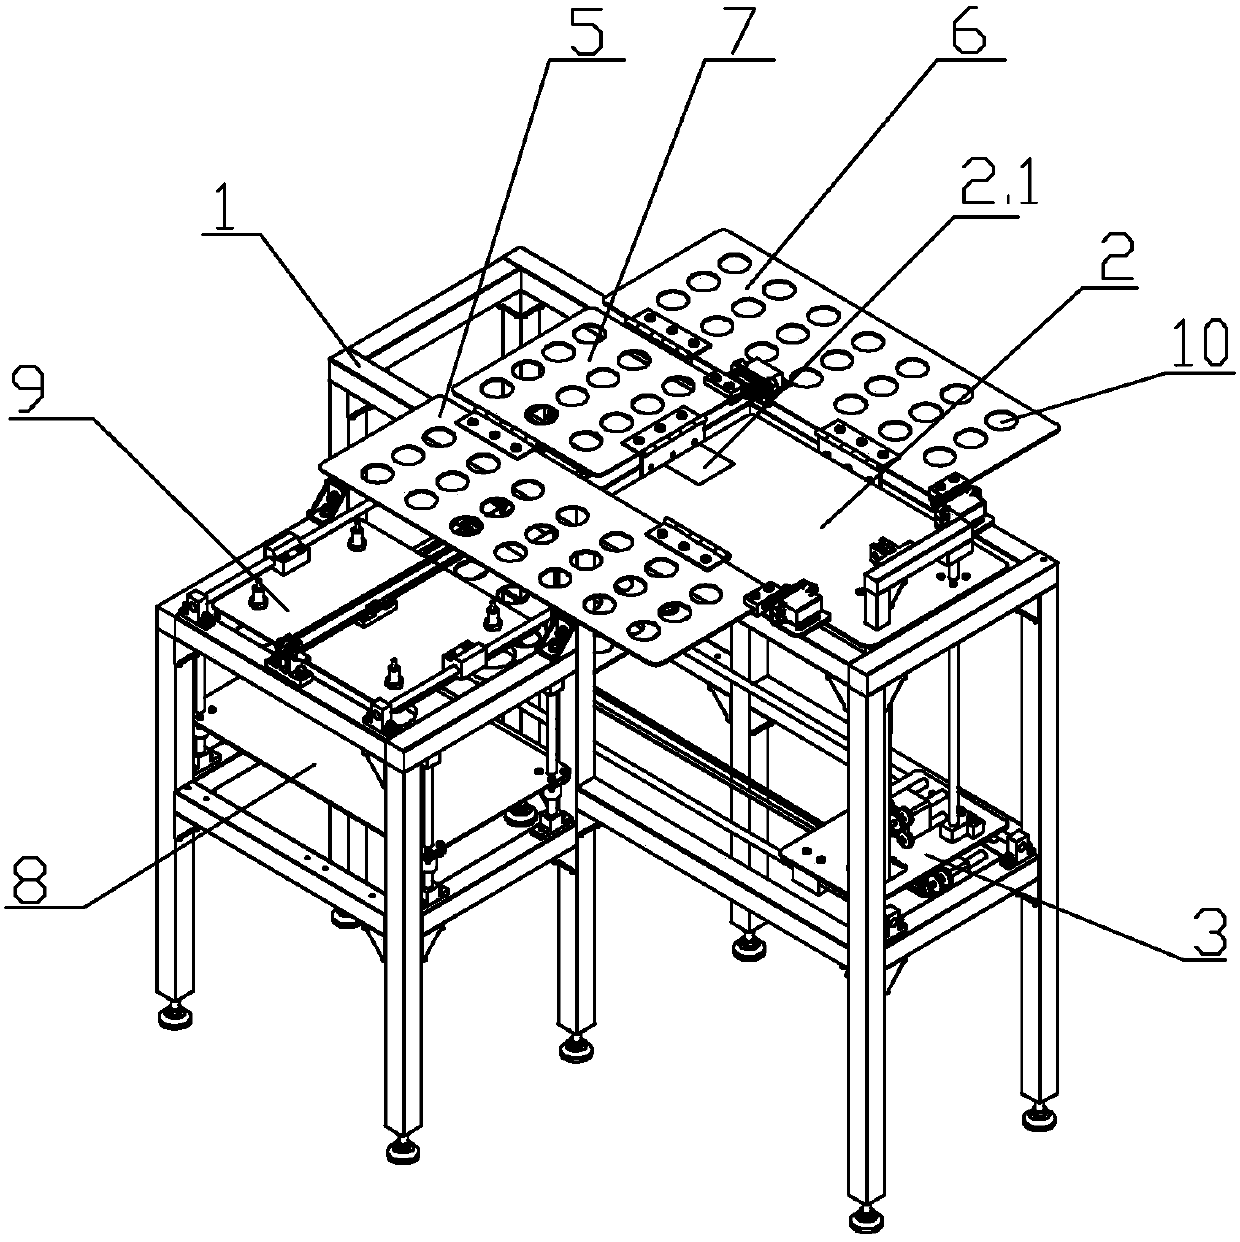 An automatic clothing folding packaging machine and a clothing folding packaging method